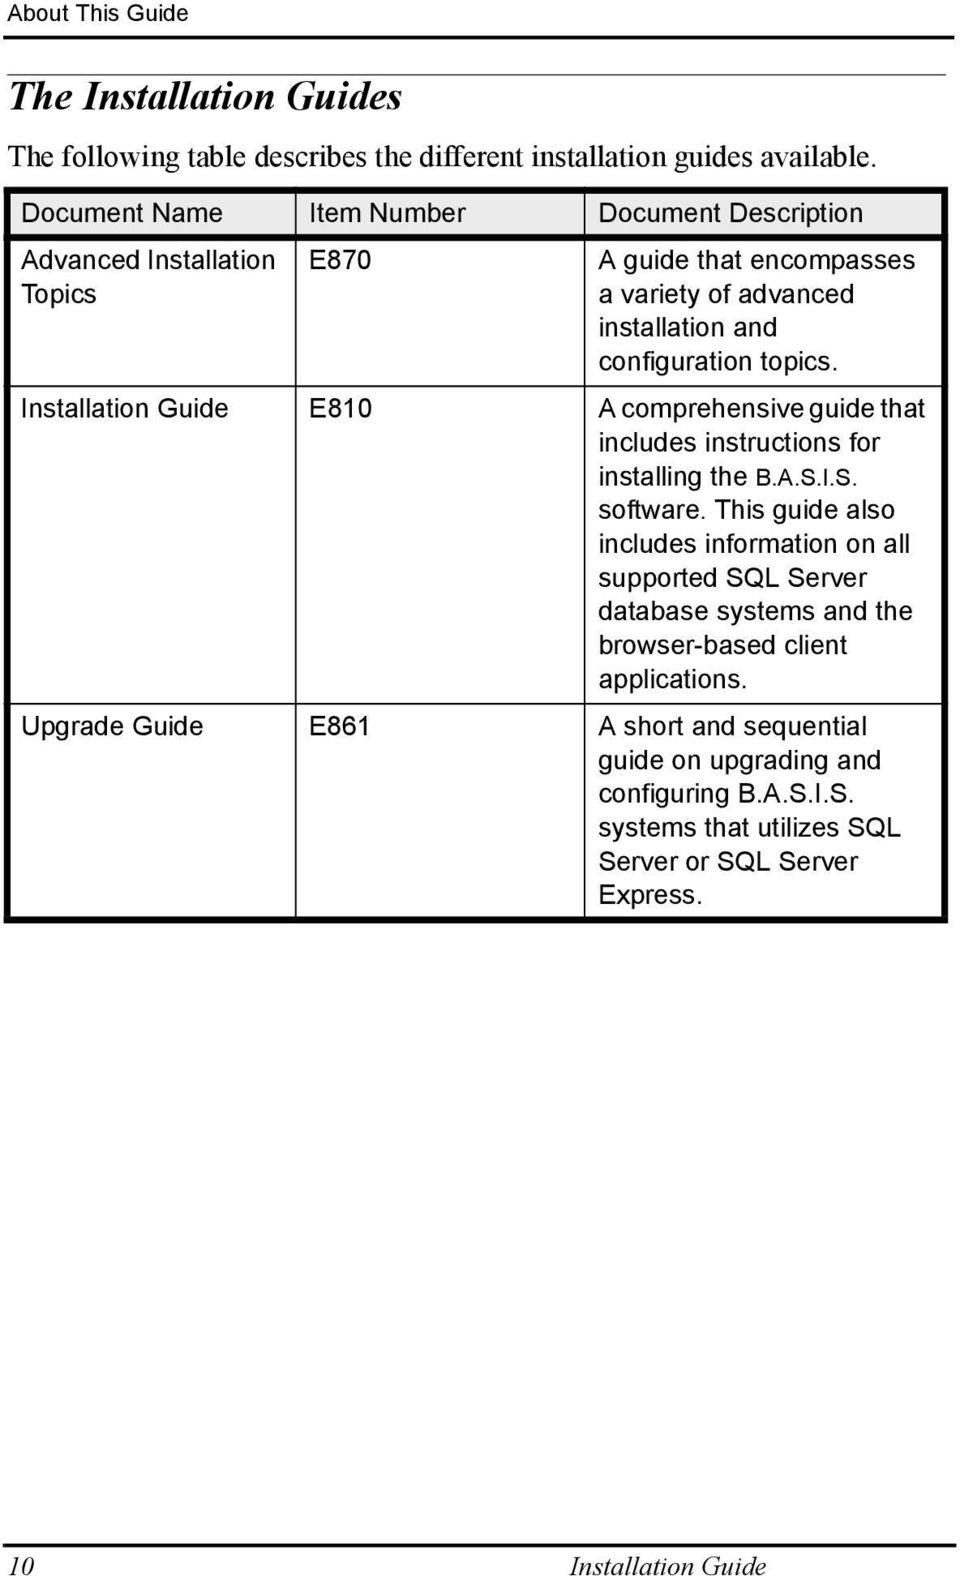 Installation Guide E810 A comprehensive guide that includes instructions for installing the B.A.S.I.S. software.